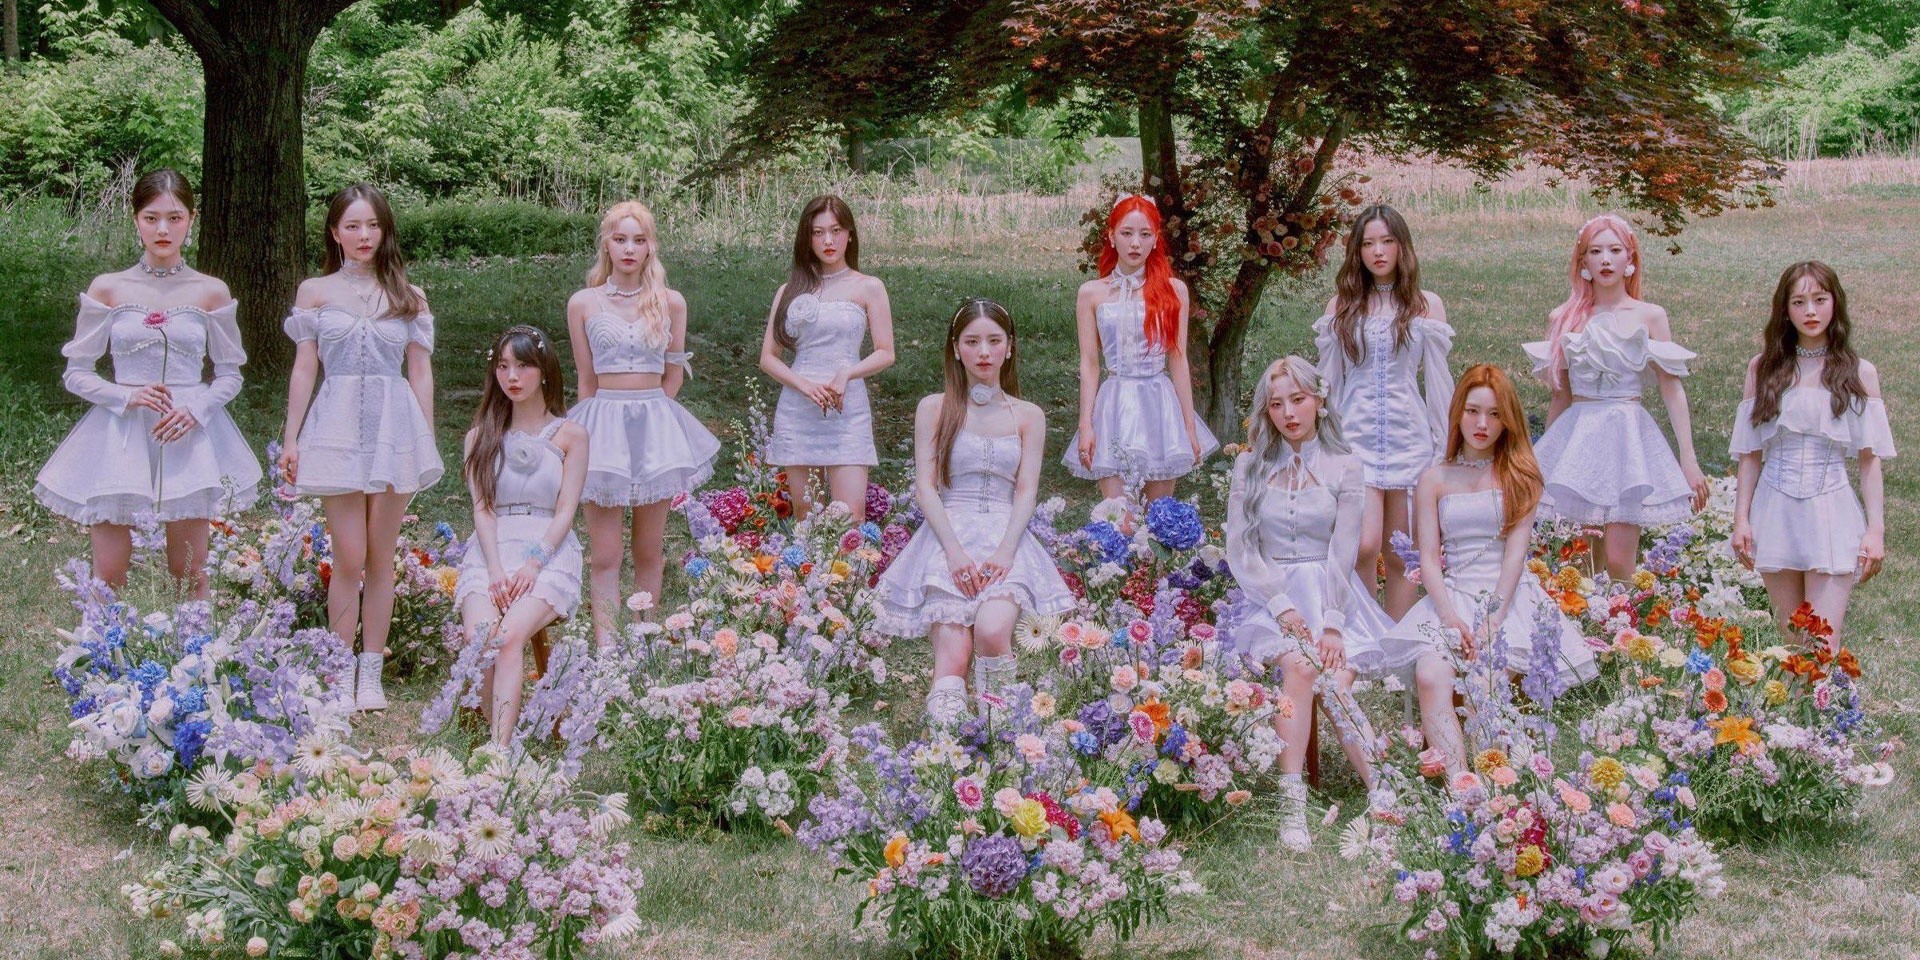 LOONA announce comeback EP 'Flip That', coming this June – watch